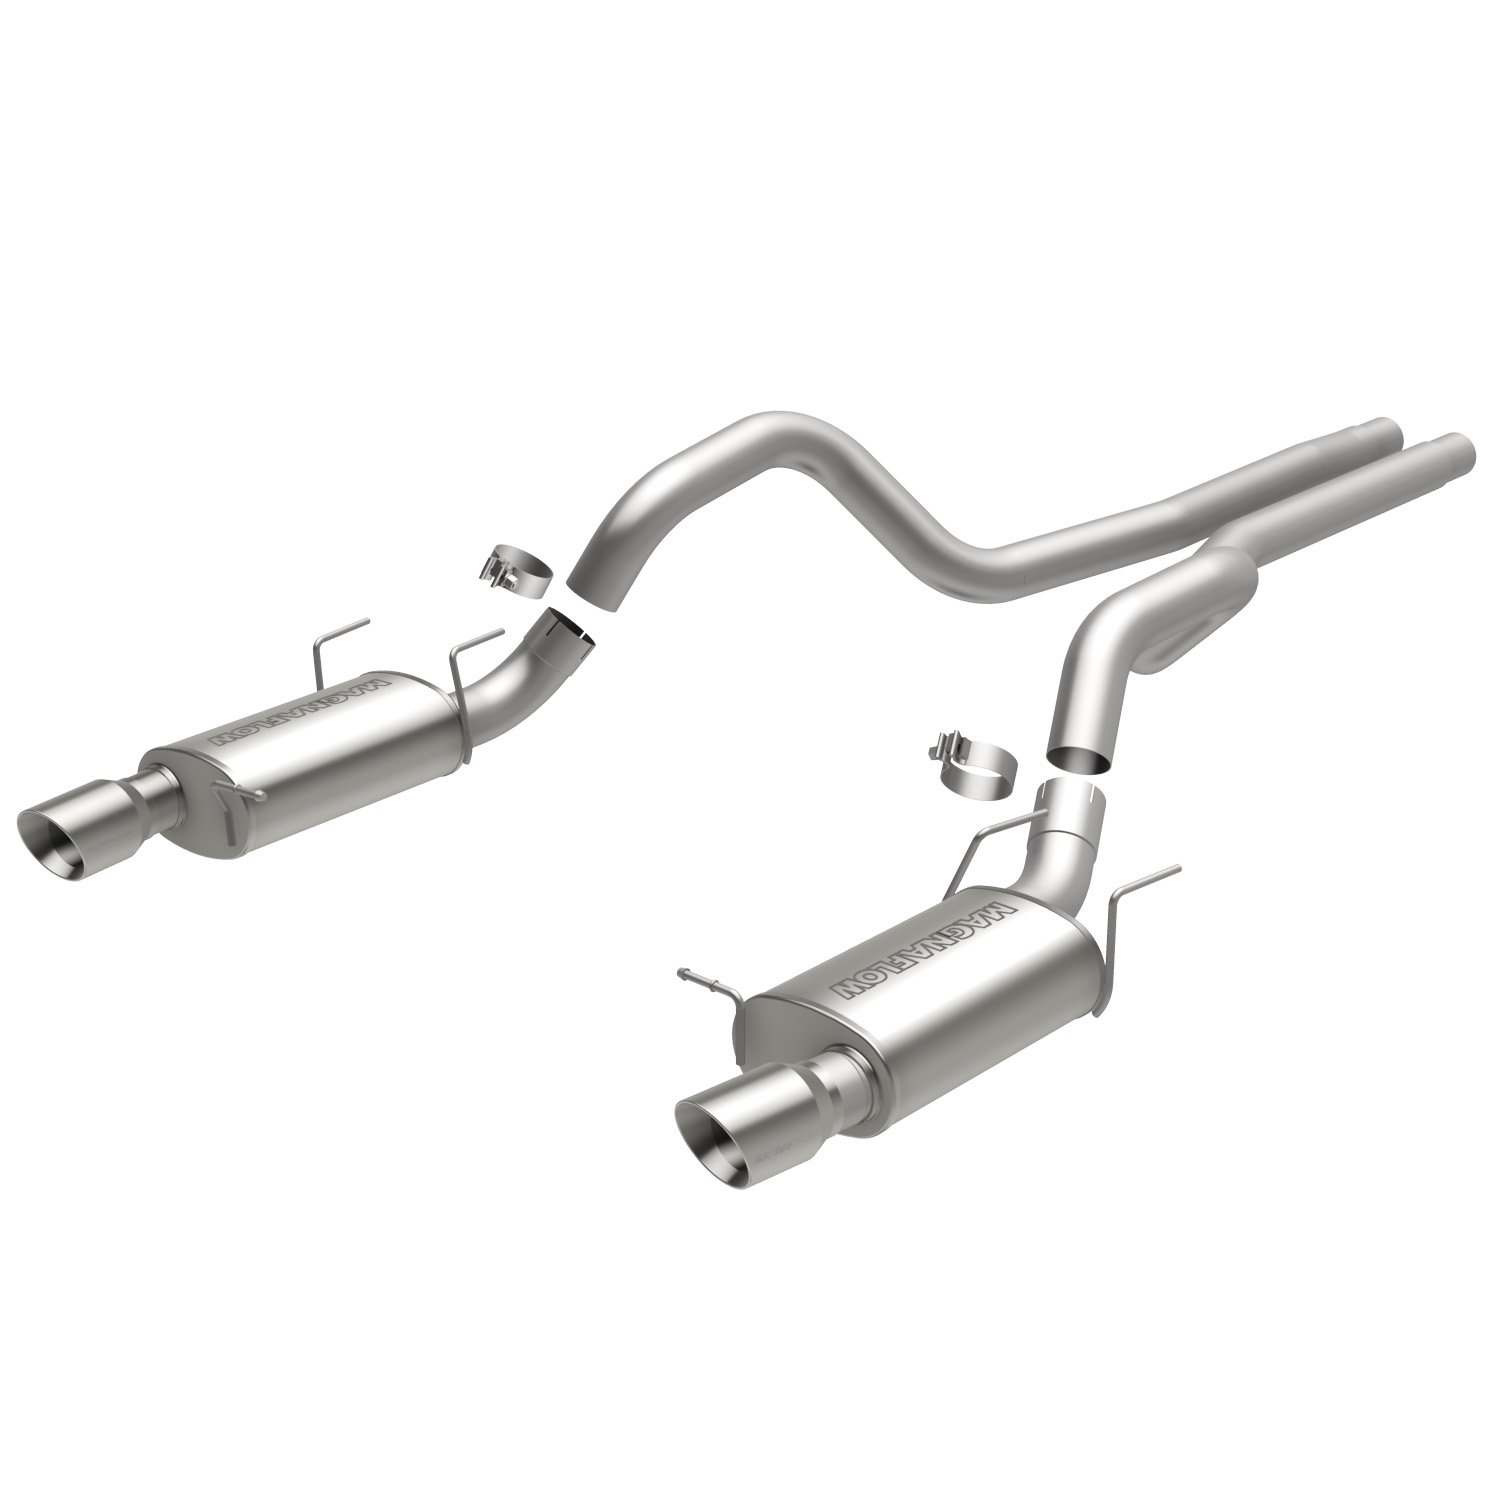 Street Series Cat-Back Exhaust System 2013-2014 Mustang GT 5.0L V8